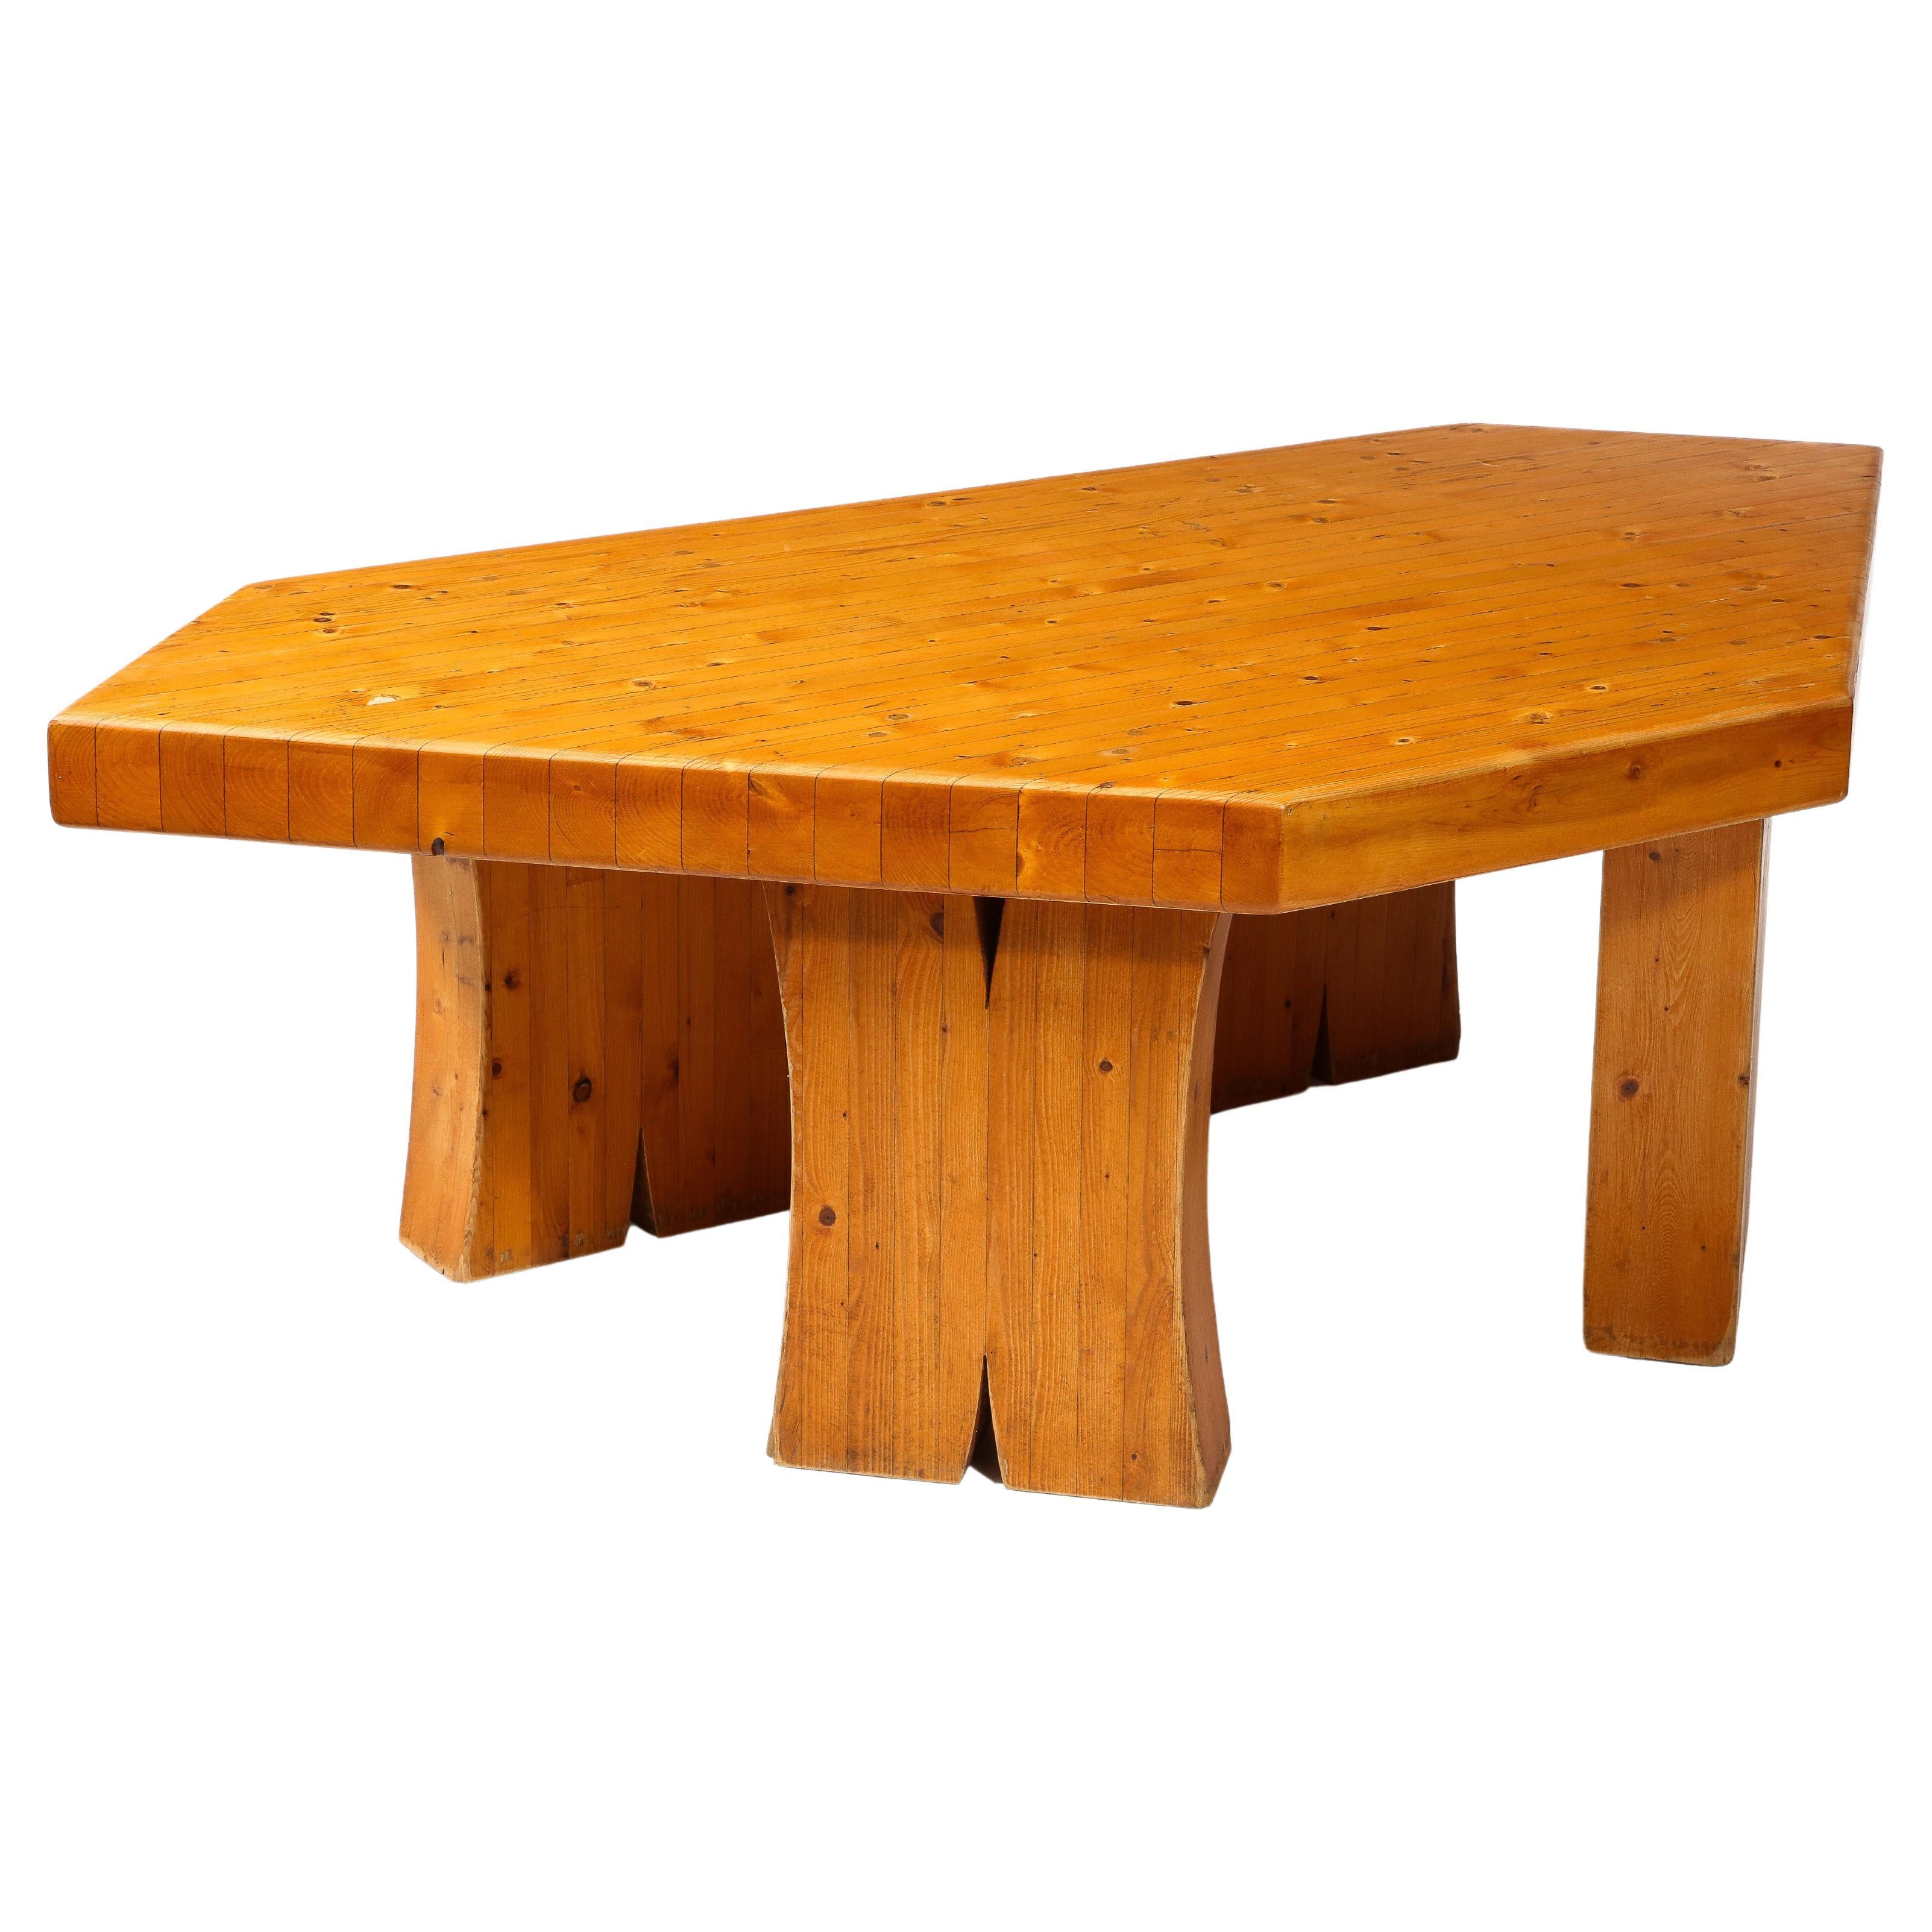 Large Solid Pine Irregularly Shaped Brutalist Coffee Table, France 1960's